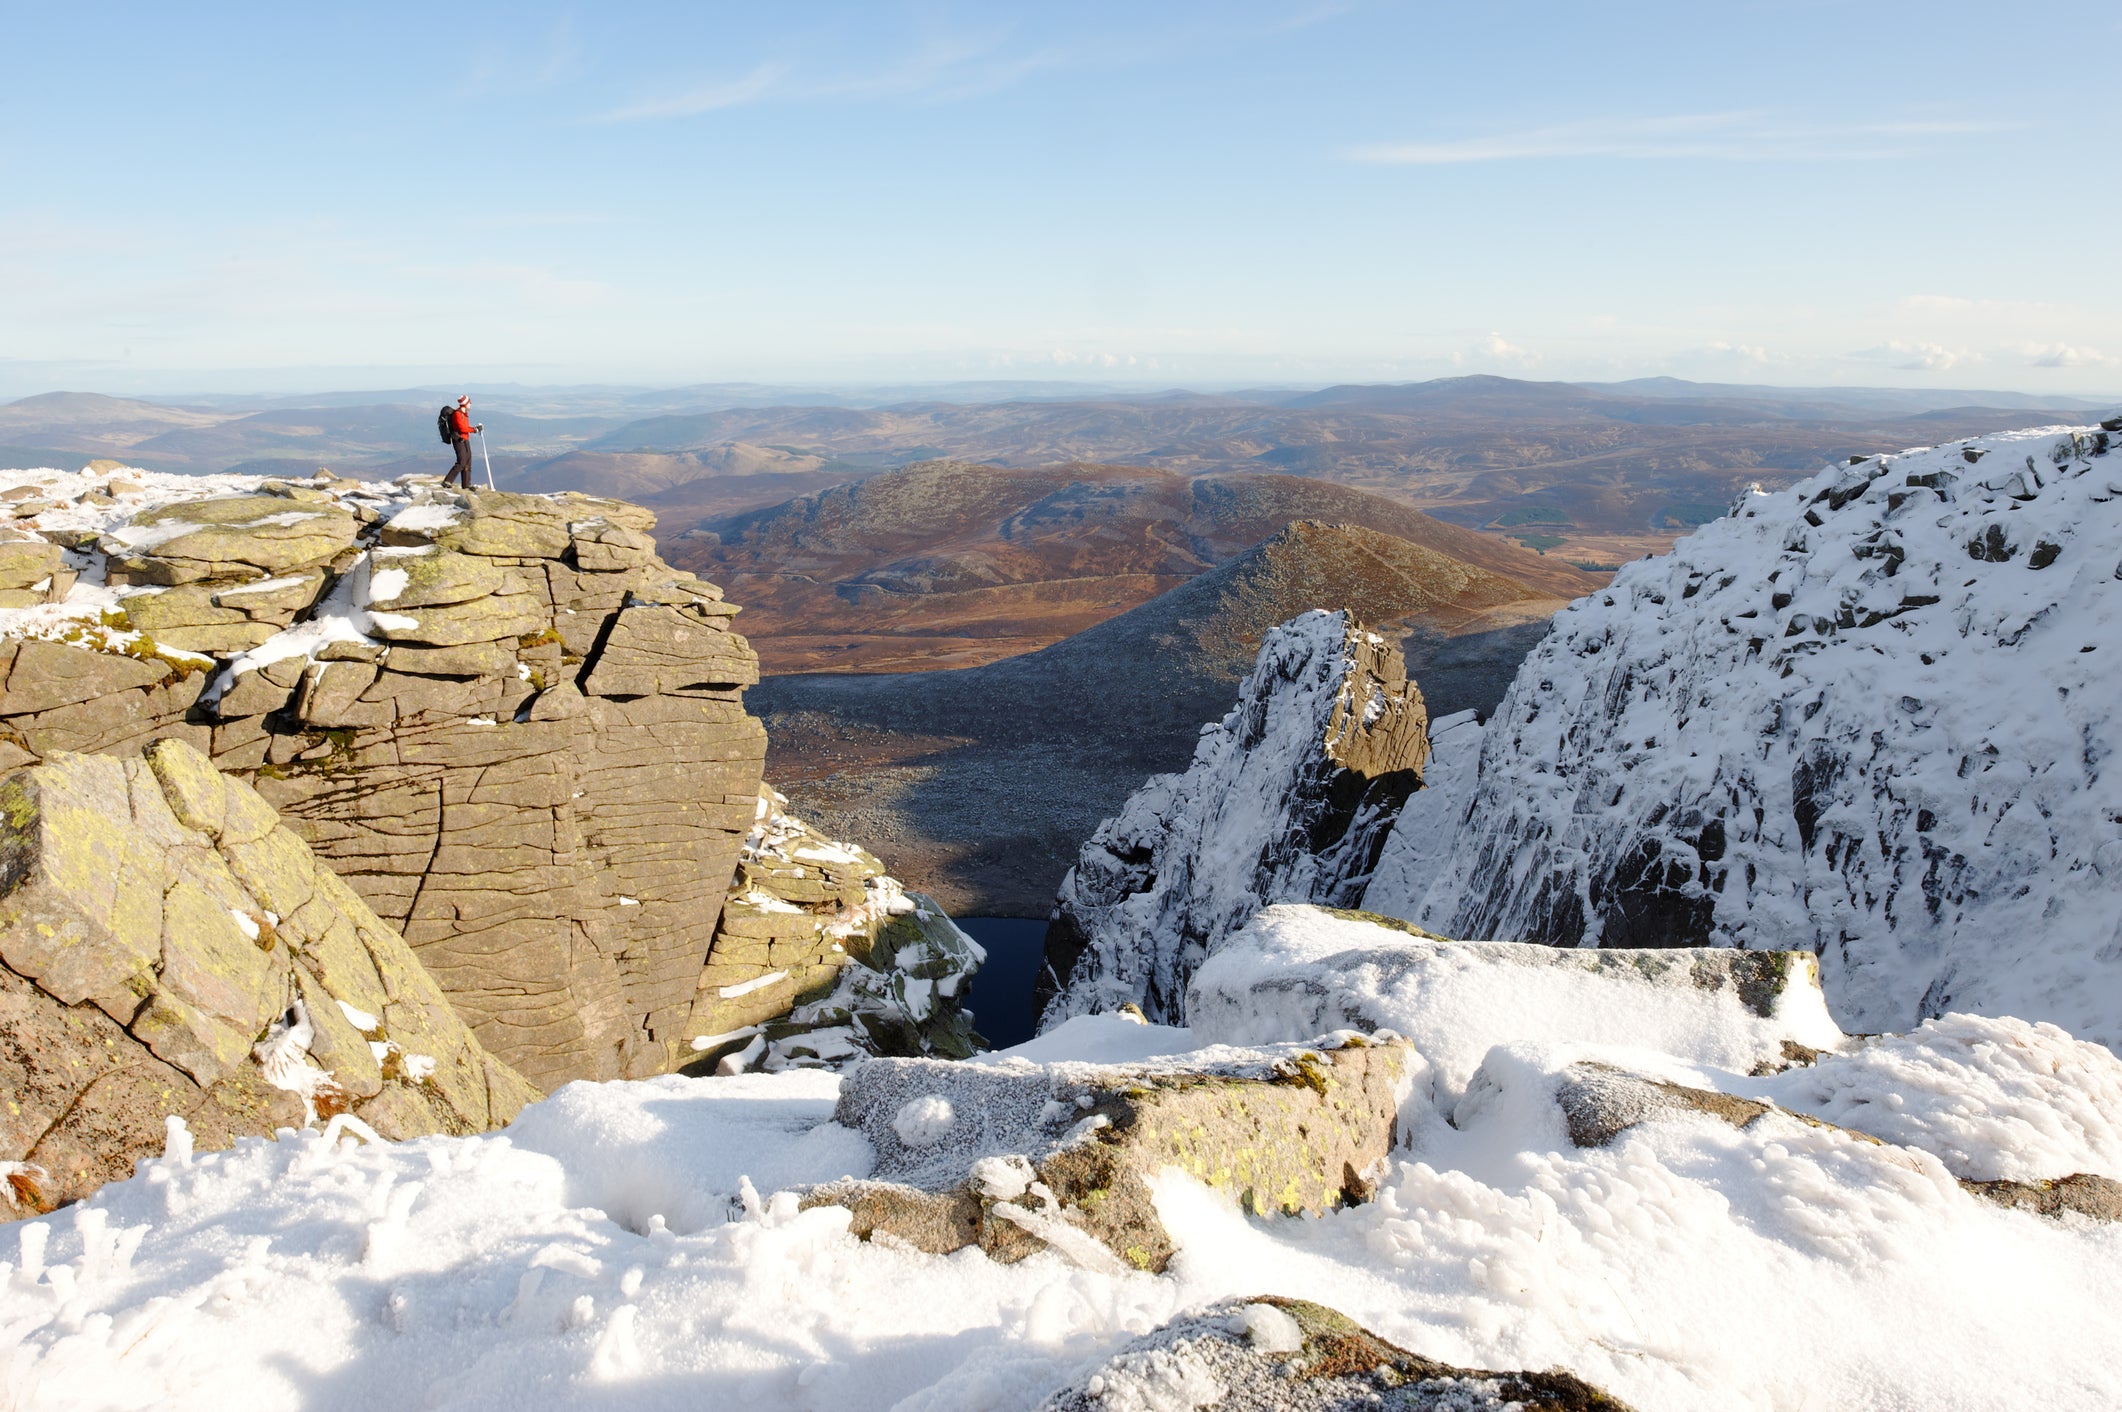 Wrap up warm to hike snow-capped Scotland’s Cairngorms mountain range